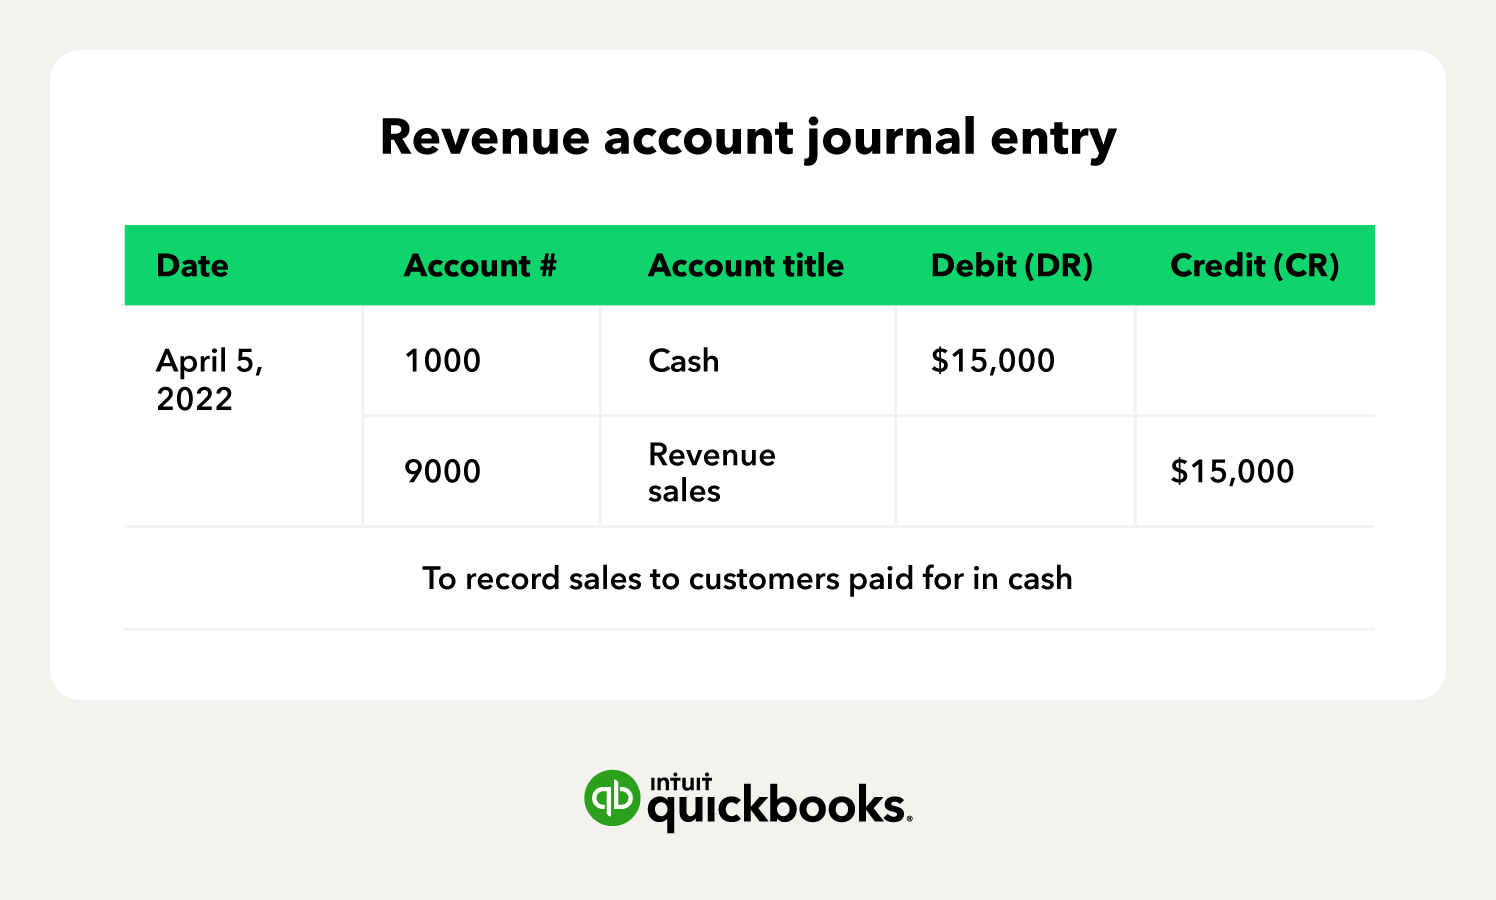 illustration of a revenue account journal entry